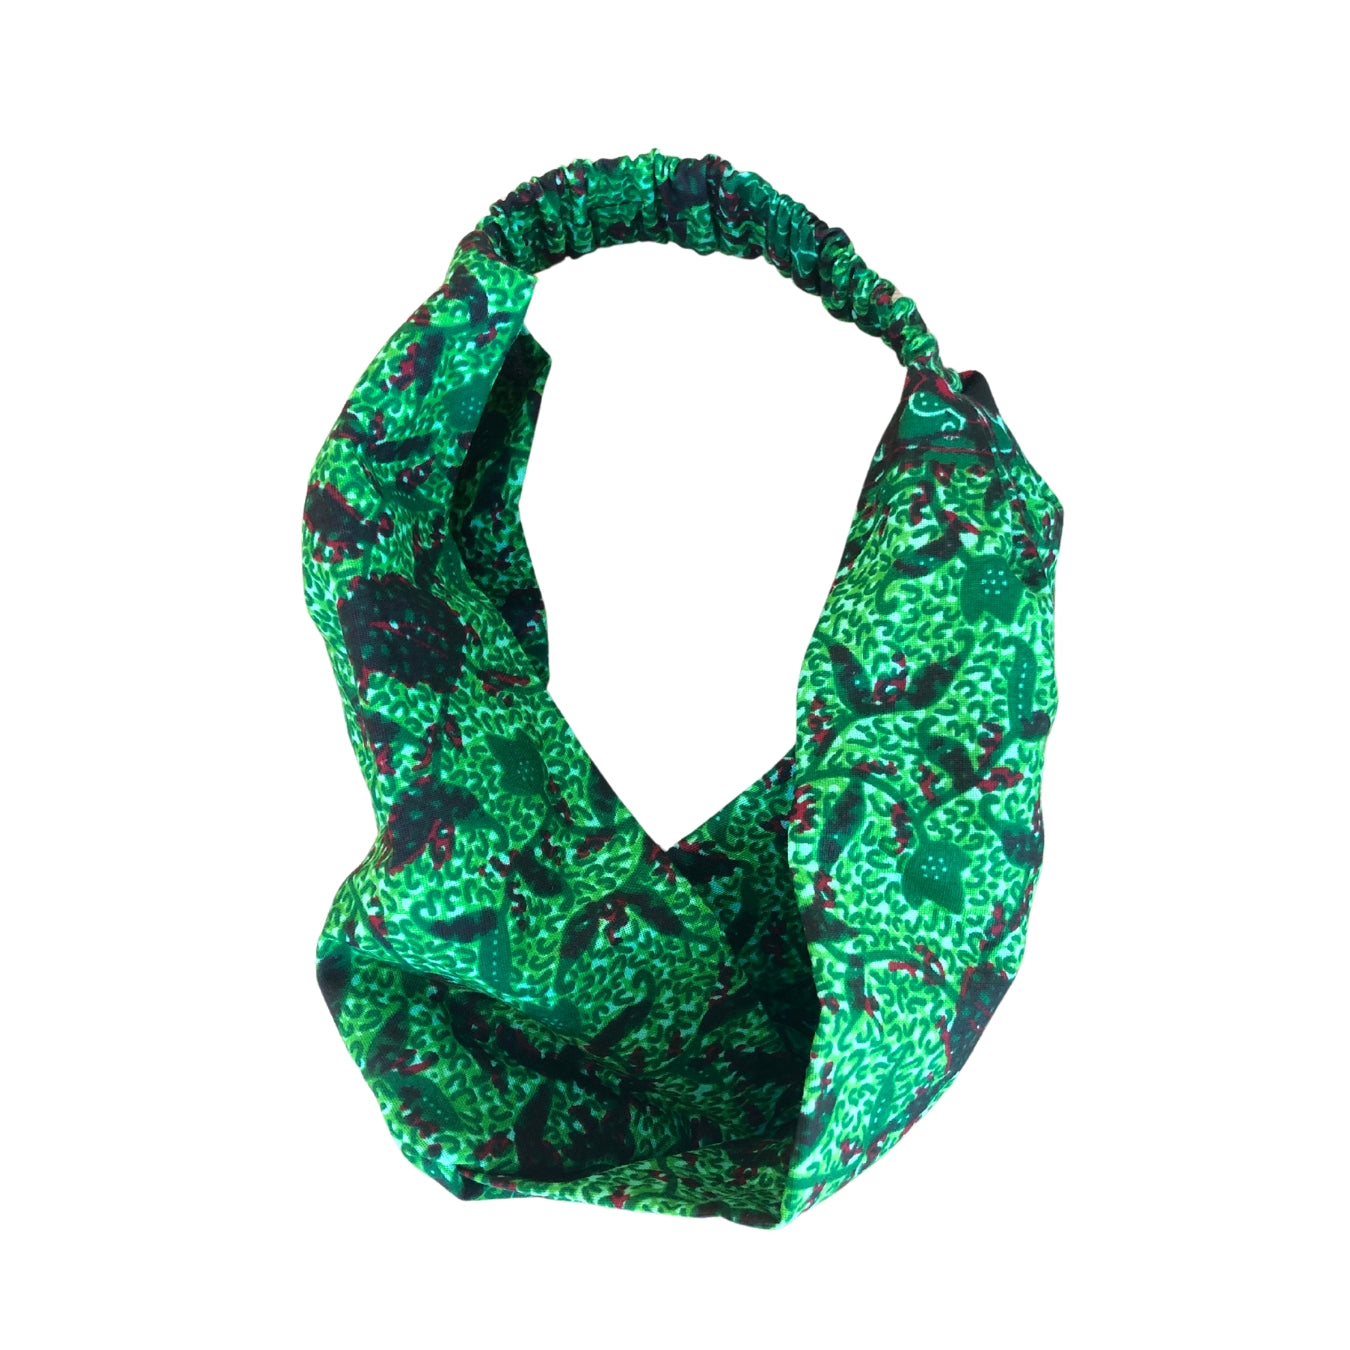 A green patterned headband on a white plain background.